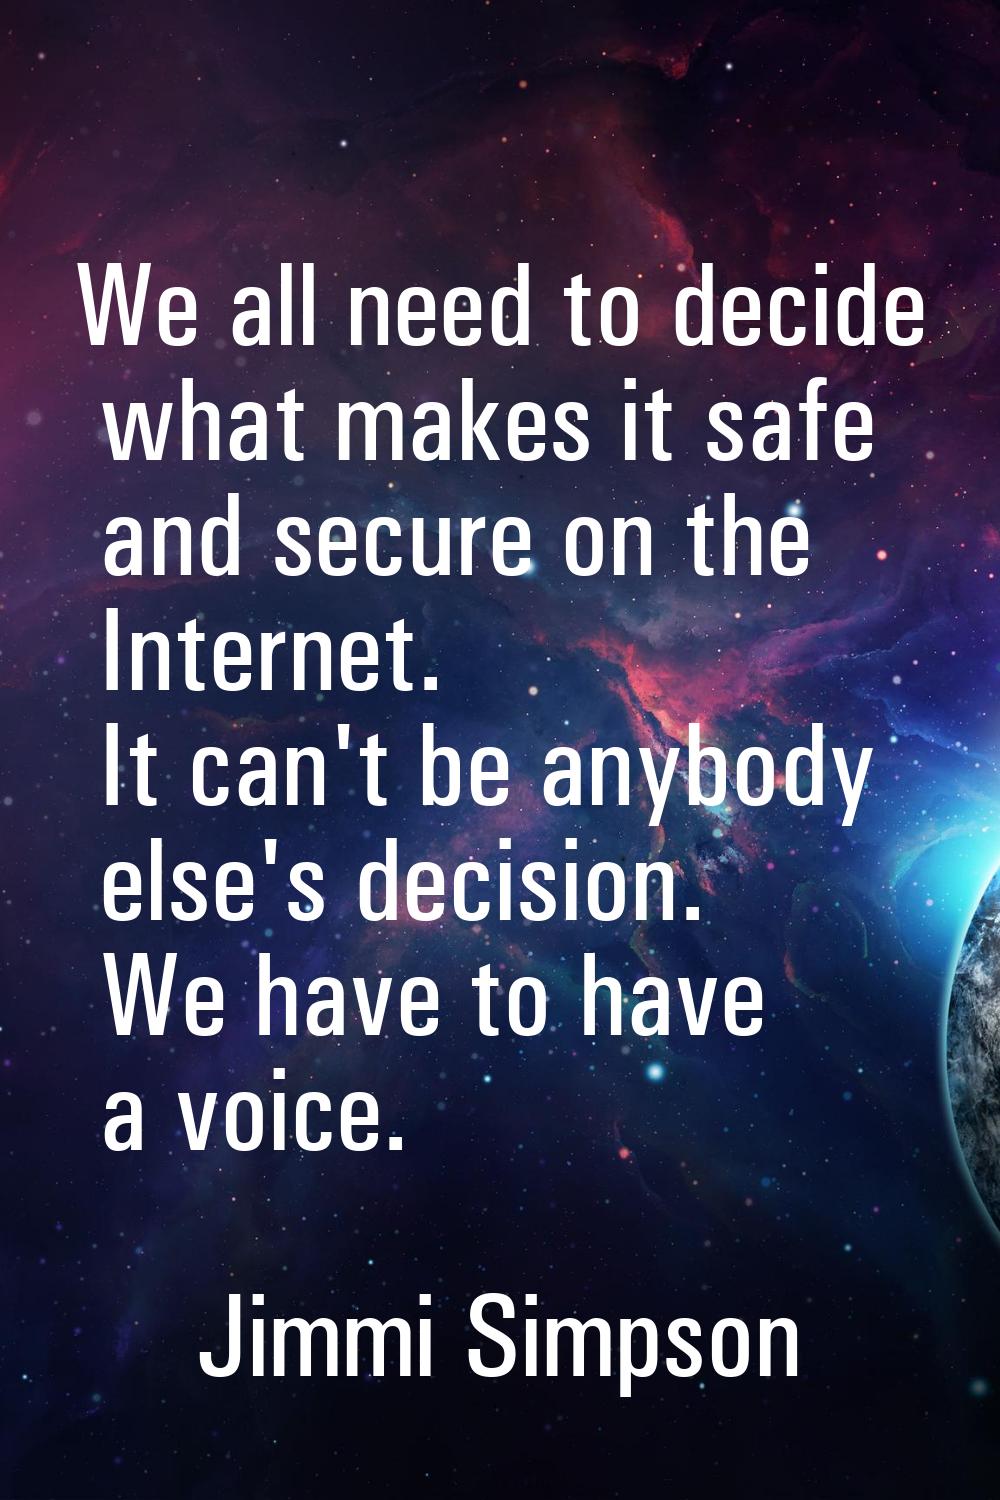 We all need to decide what makes it safe and secure on the Internet. It can't be anybody else's dec